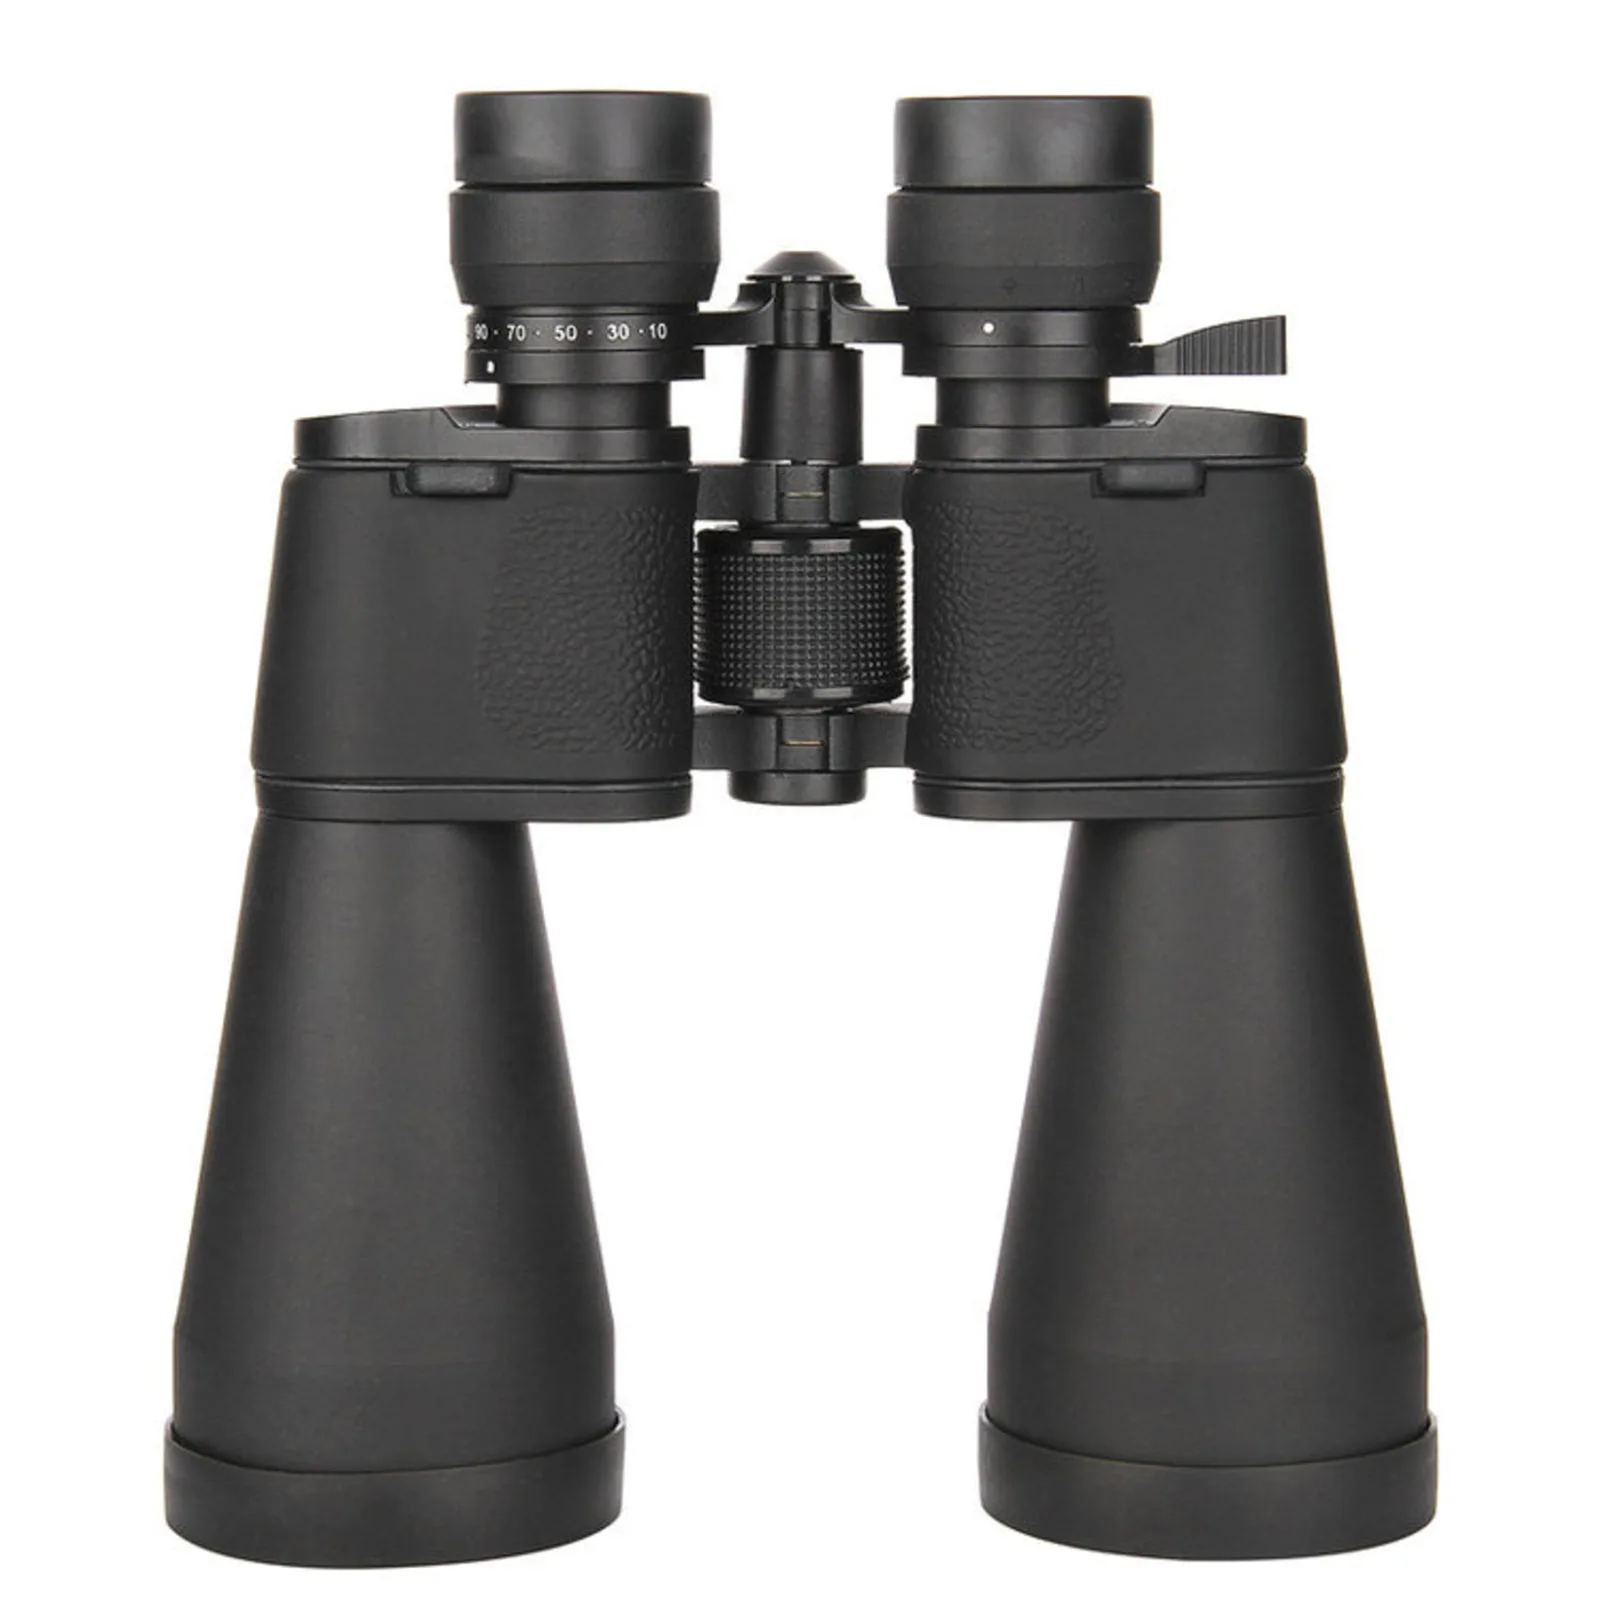 

Zoom Telescope Binoculars For Outdoor Bird Watching Travelling Hunting Camping High Power Sports Scope High Definition Telescope